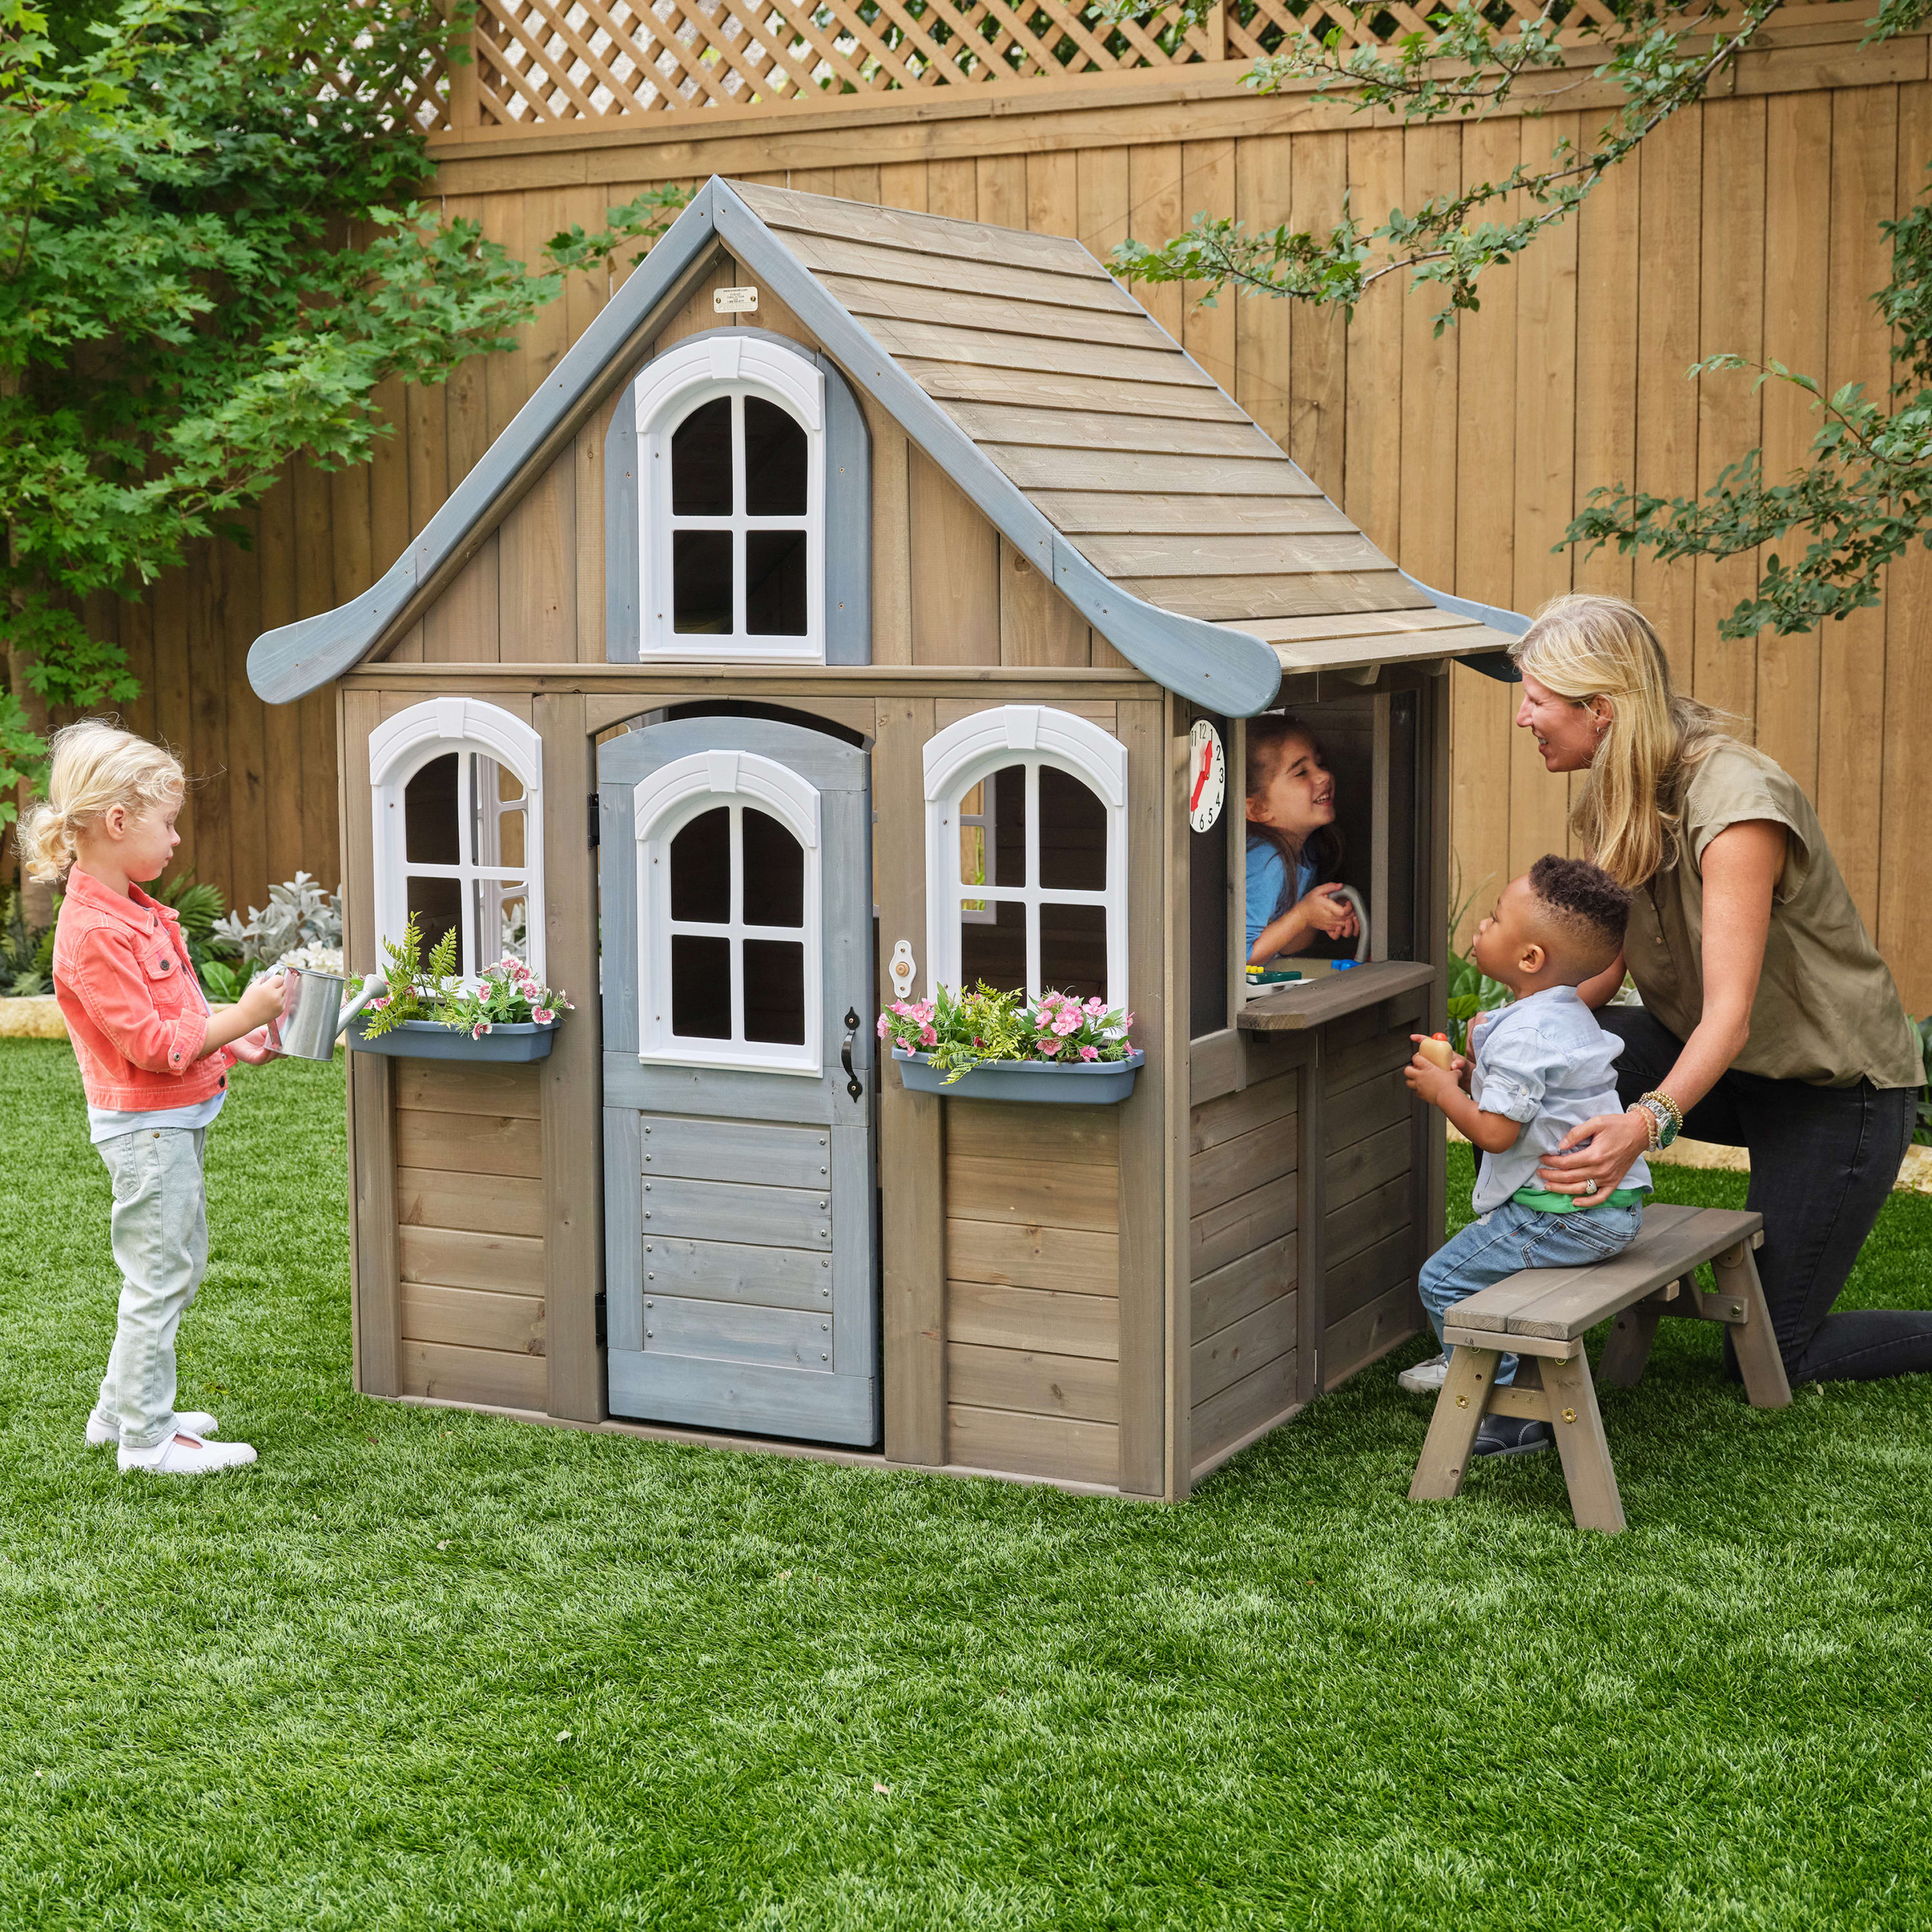 KidKraft Forestview II Wooden Outdoor Playhouse with Ringing Doorbell, Bench and Kitchen - image 3 of 15